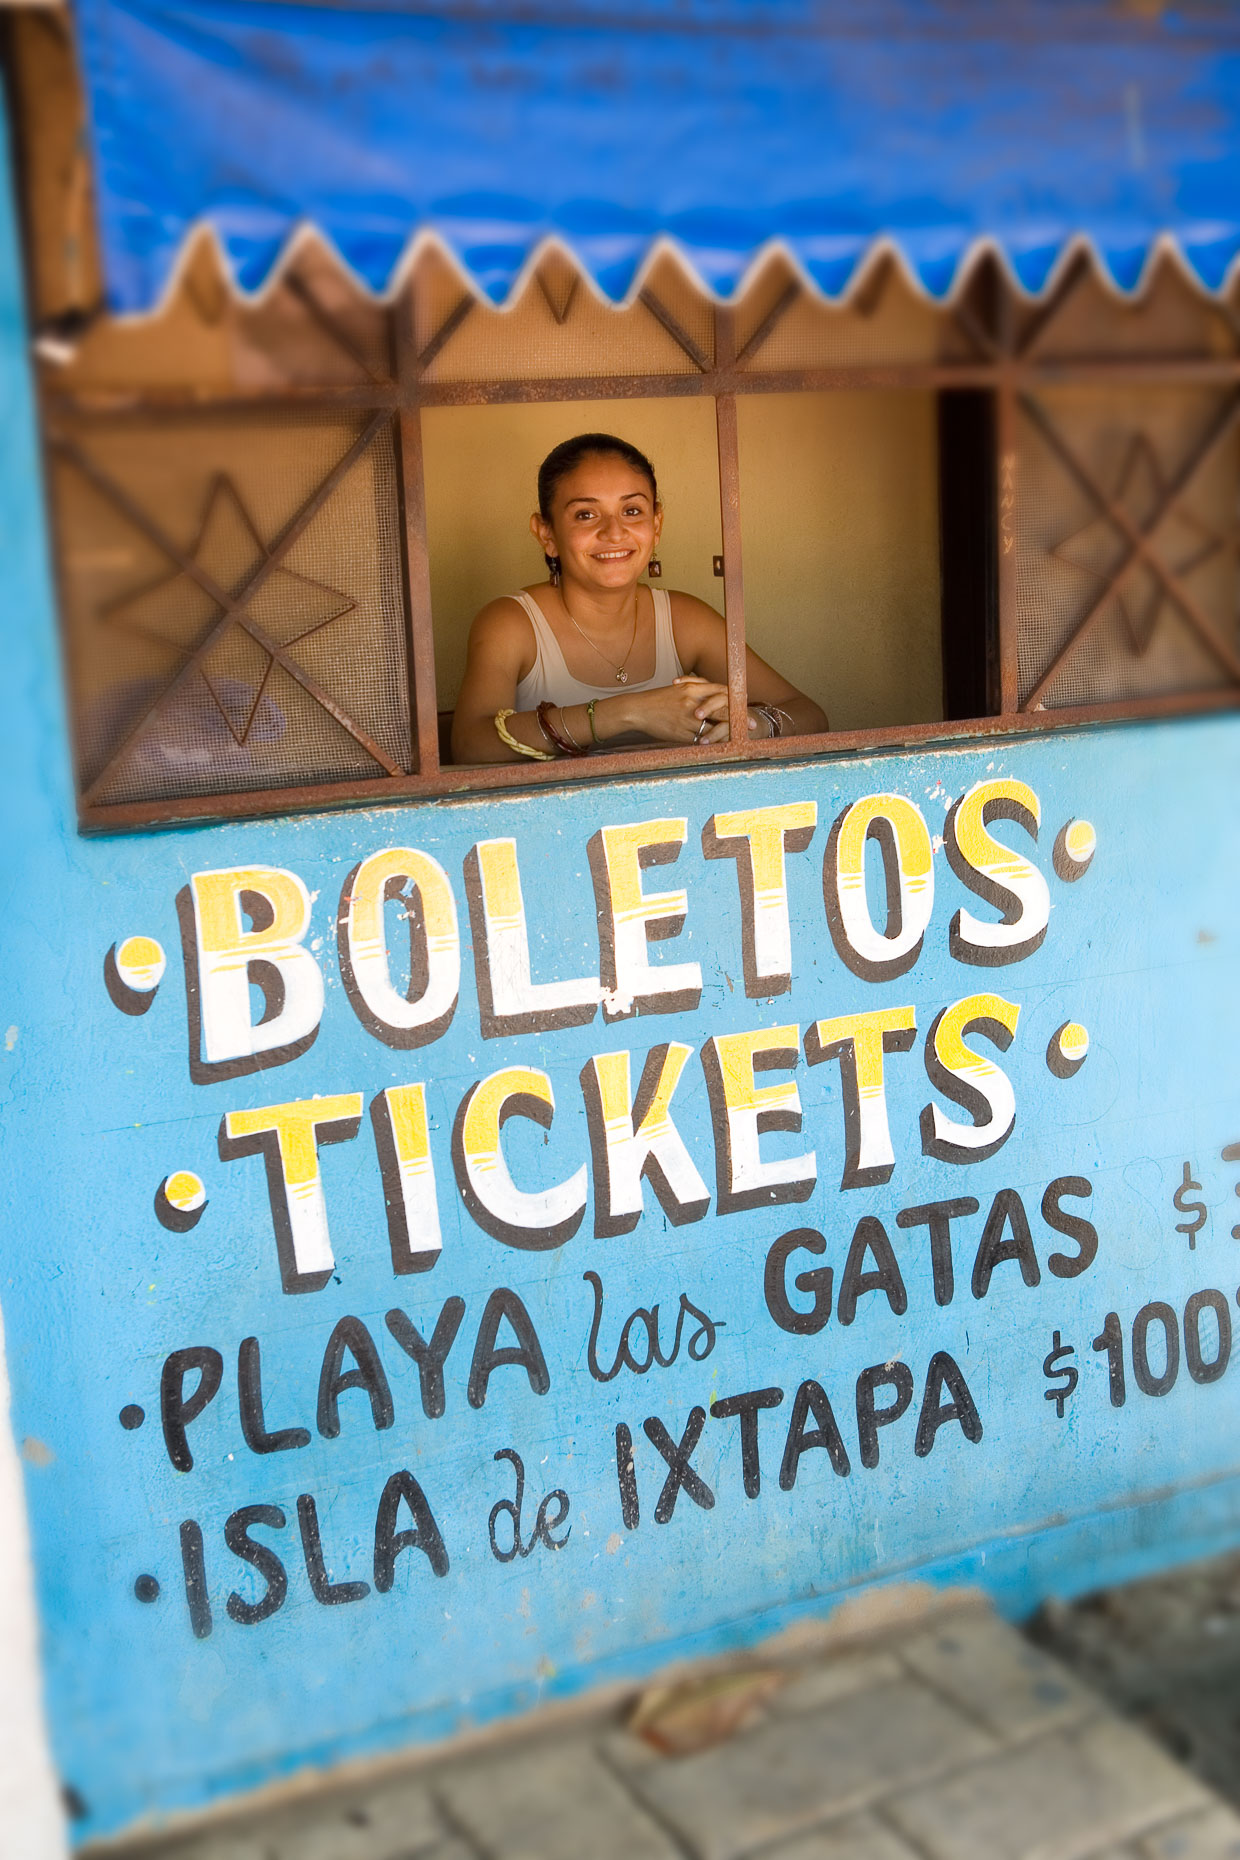 Woman in ticket booth in Zihuatanejo, Mexico by David Zaitz